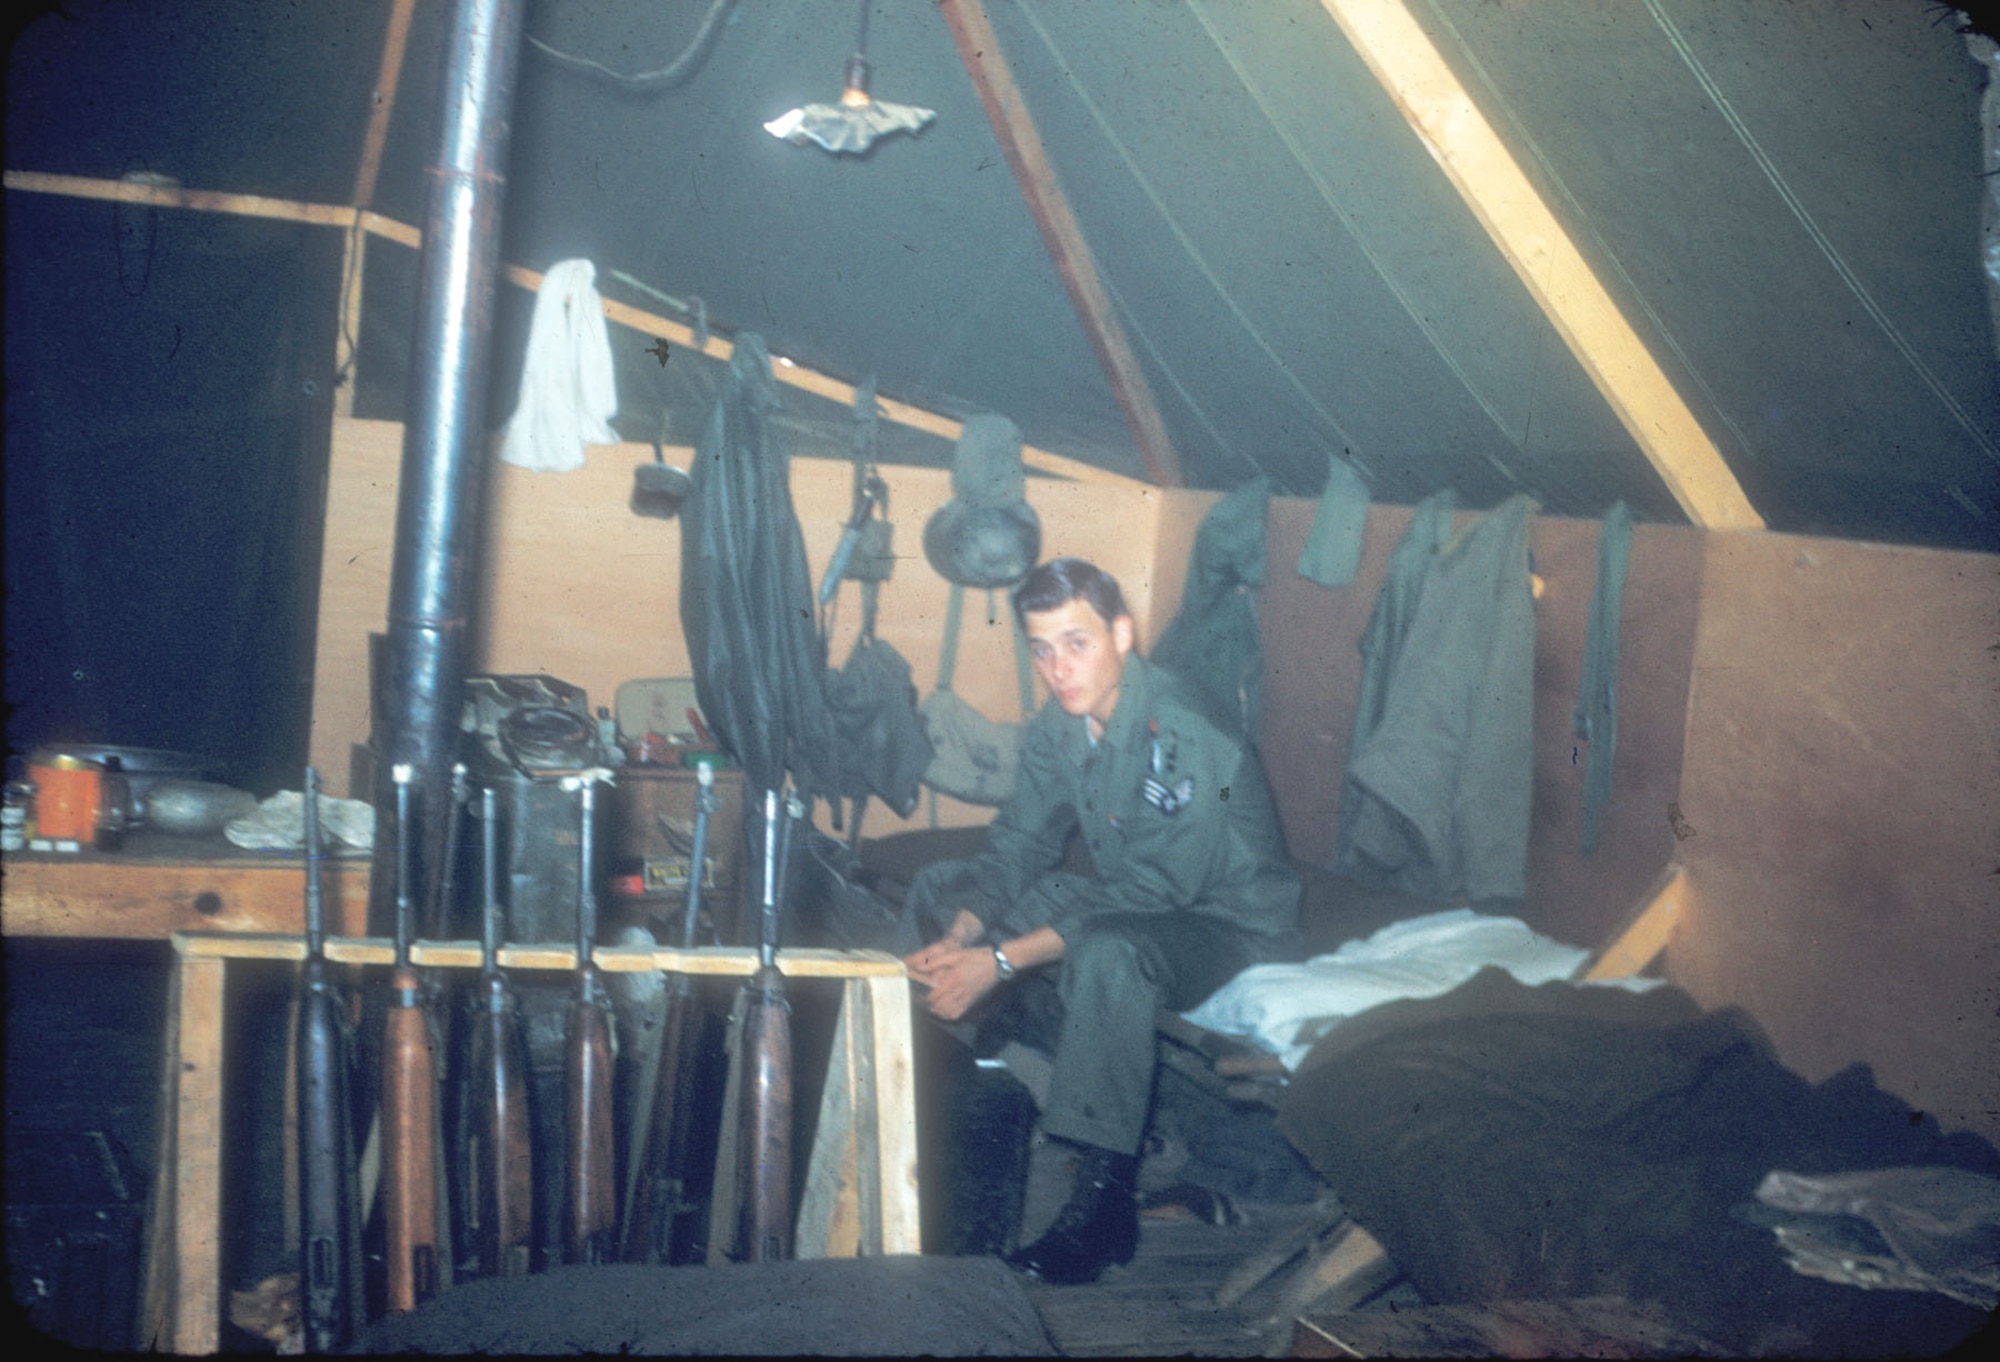 Airman 1st Class Richard Heimerich in his corner of a barracks tent at K-47 (Chunchon). Note the gun rack with several carbines readily available for use in an emergency. (U.S. Air Force photo)